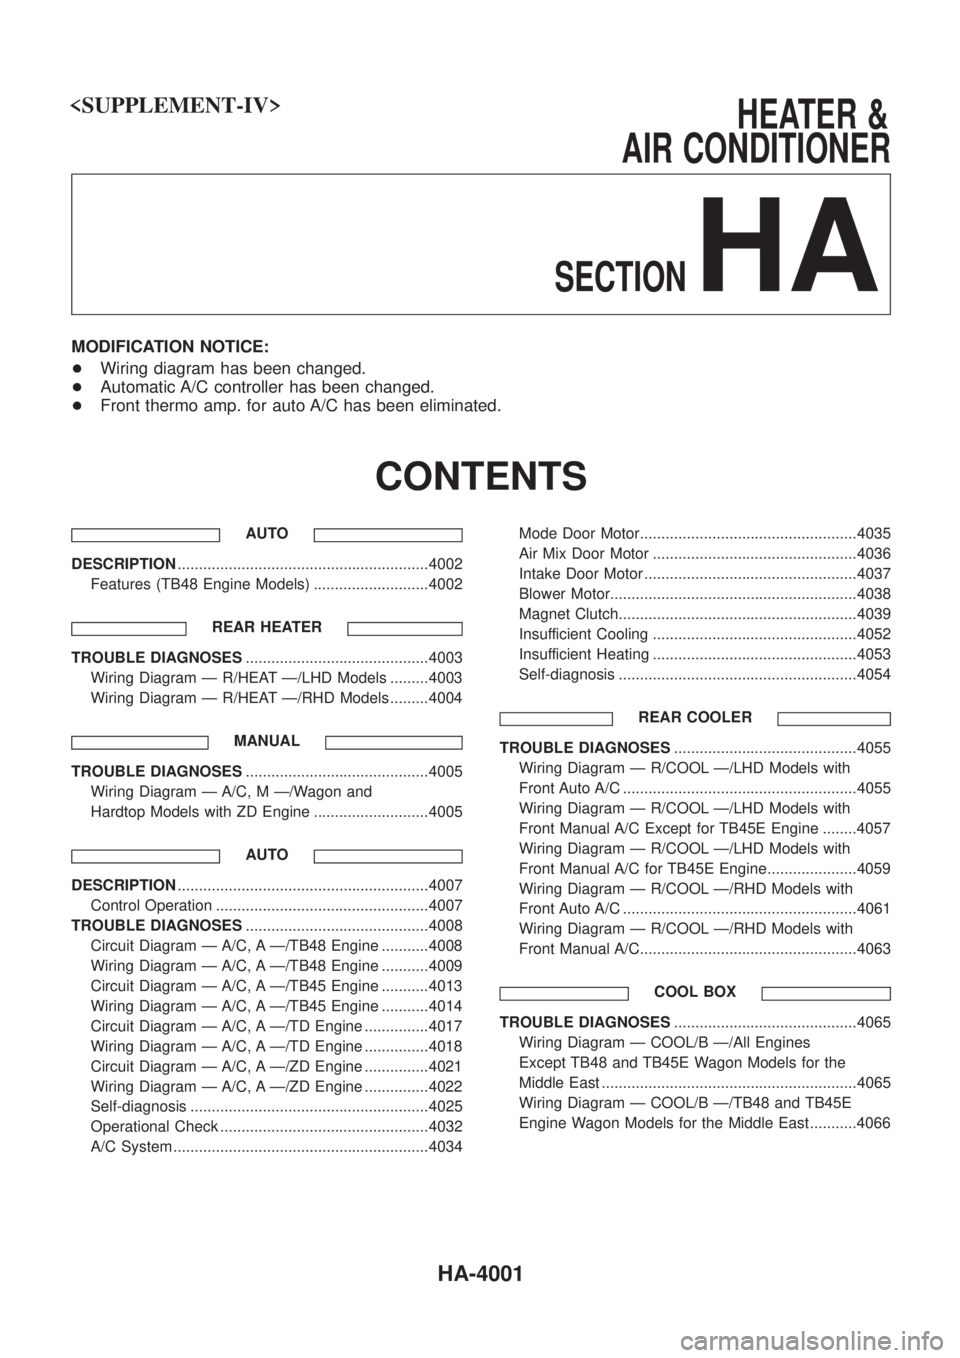 NISSAN PATROL 2004  Electronic User Guide <SUPPLEMENT-IV>                                                                        \
          HEATER&
AIR CONDITIONER
SECTION
HA
MODIFICATION NOTICE:
+ Wiring diagram has been changed.
+ Automati